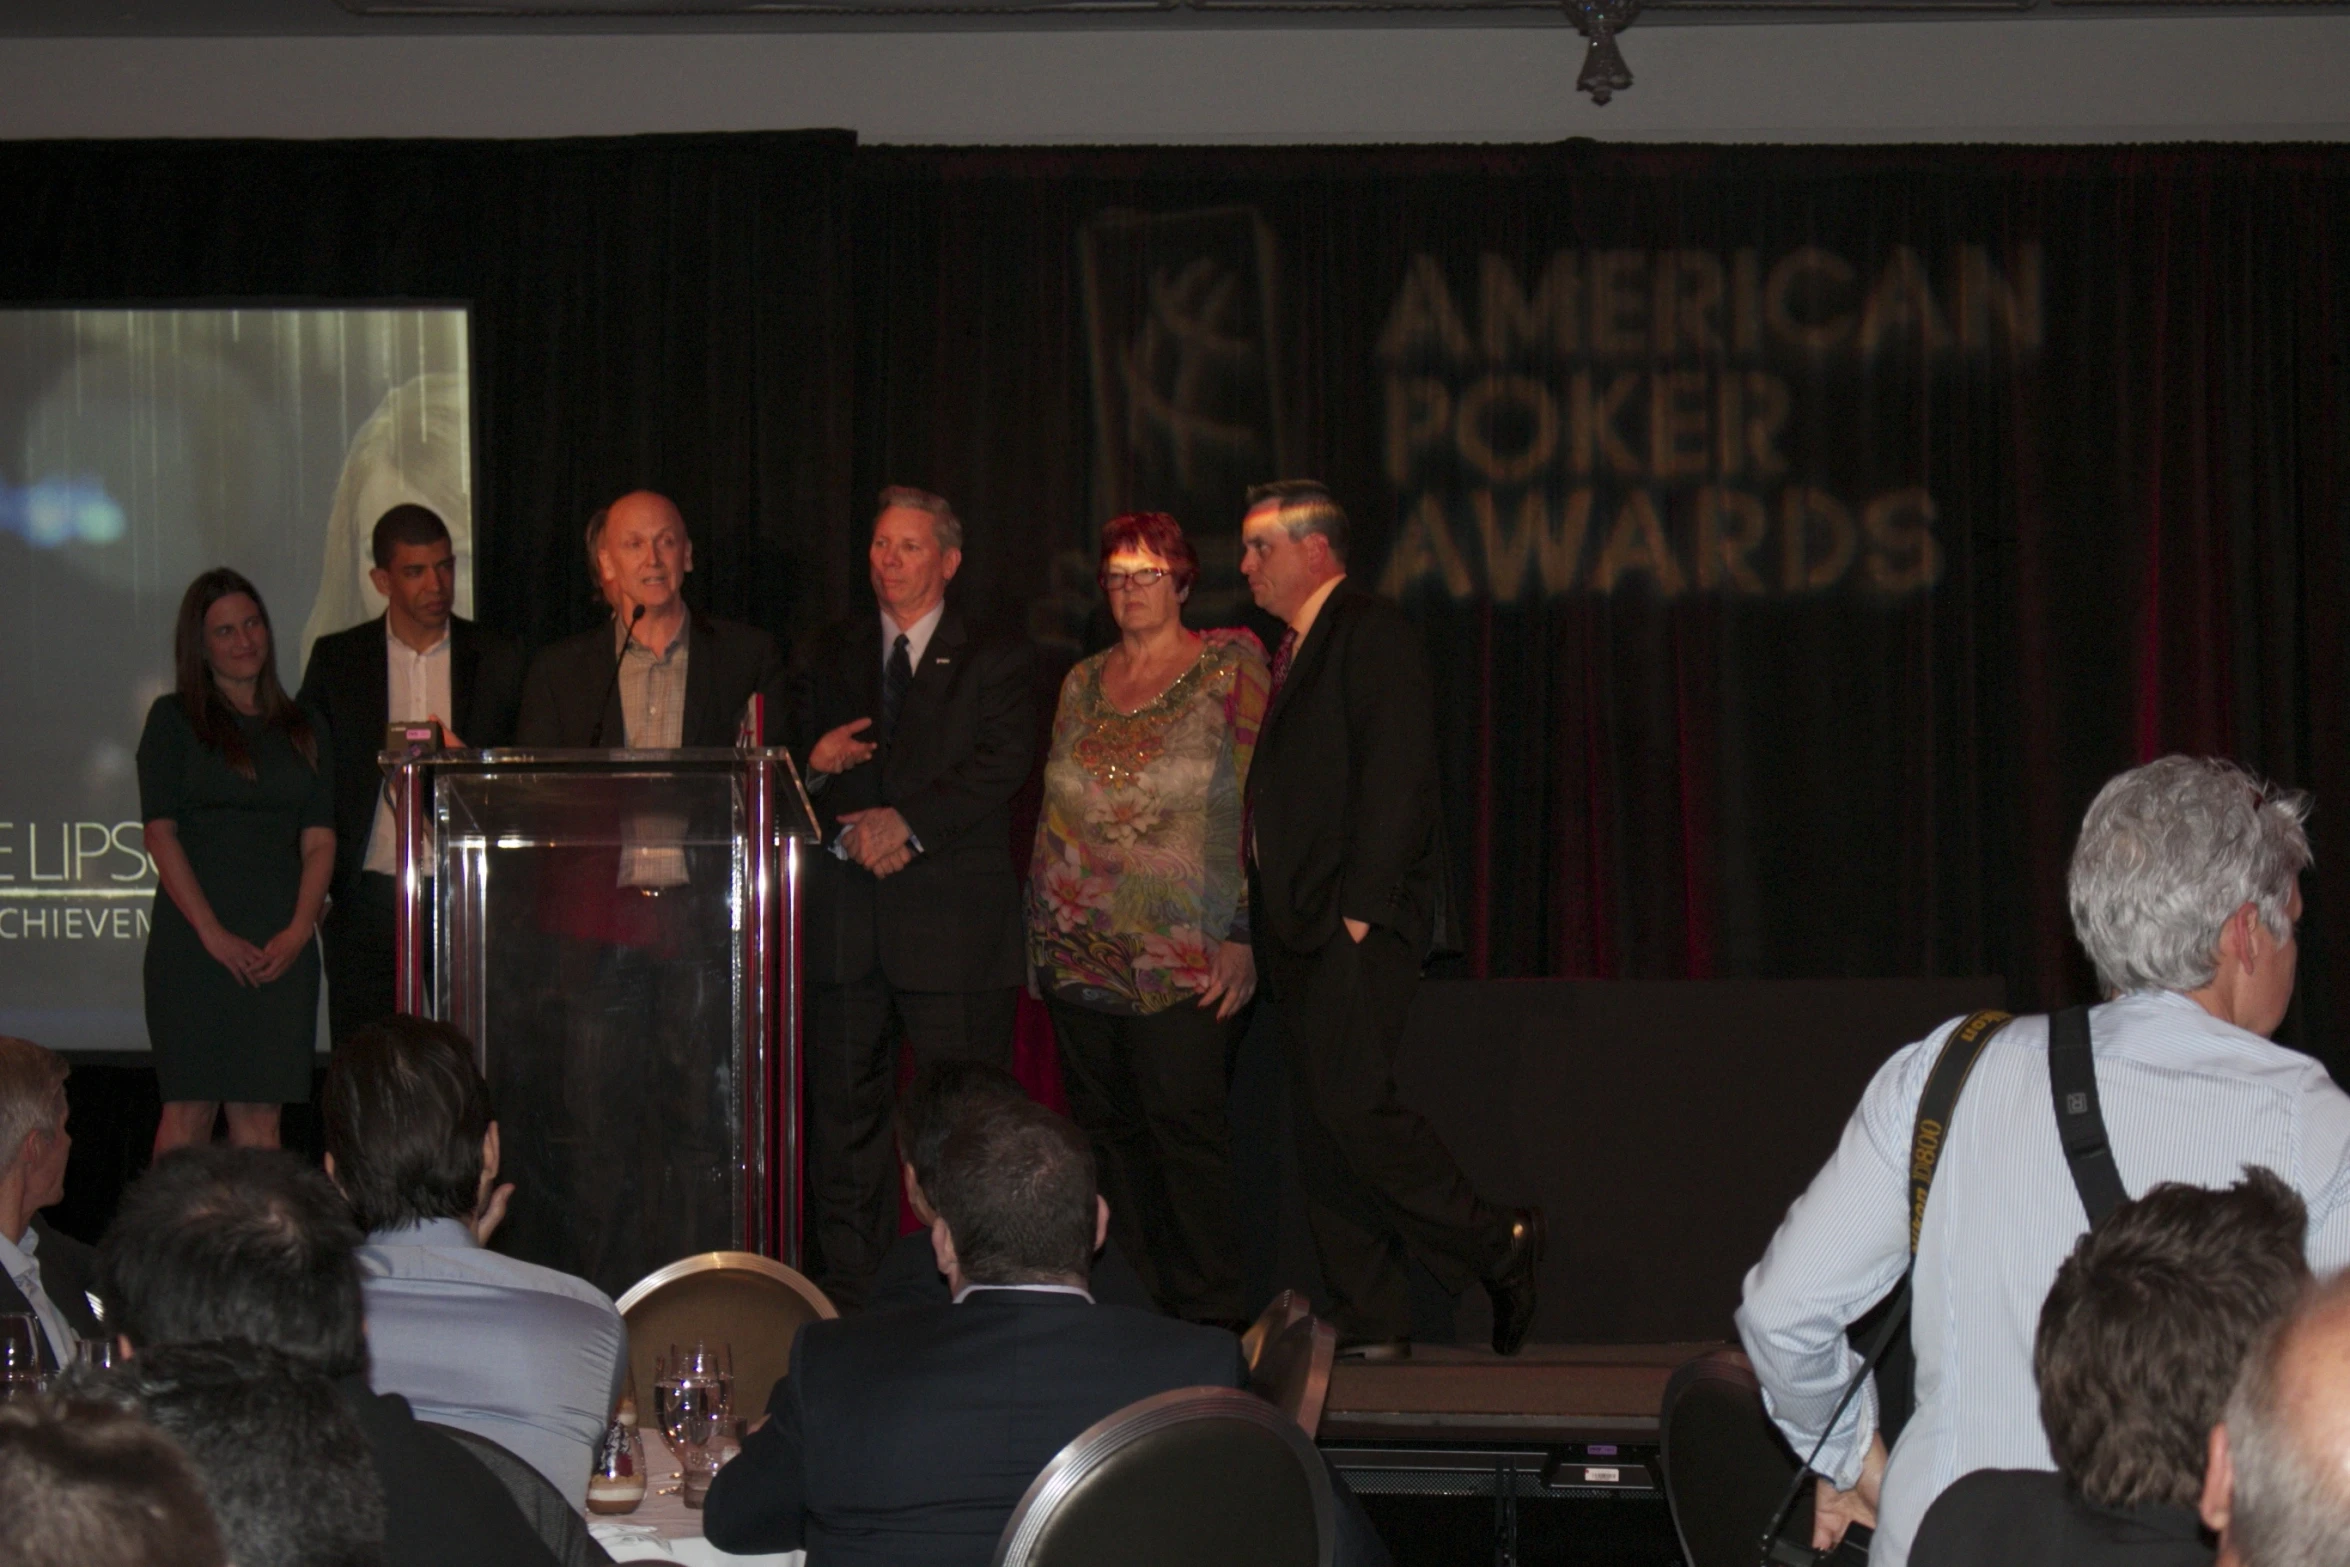 a group of people standing on stage at awards